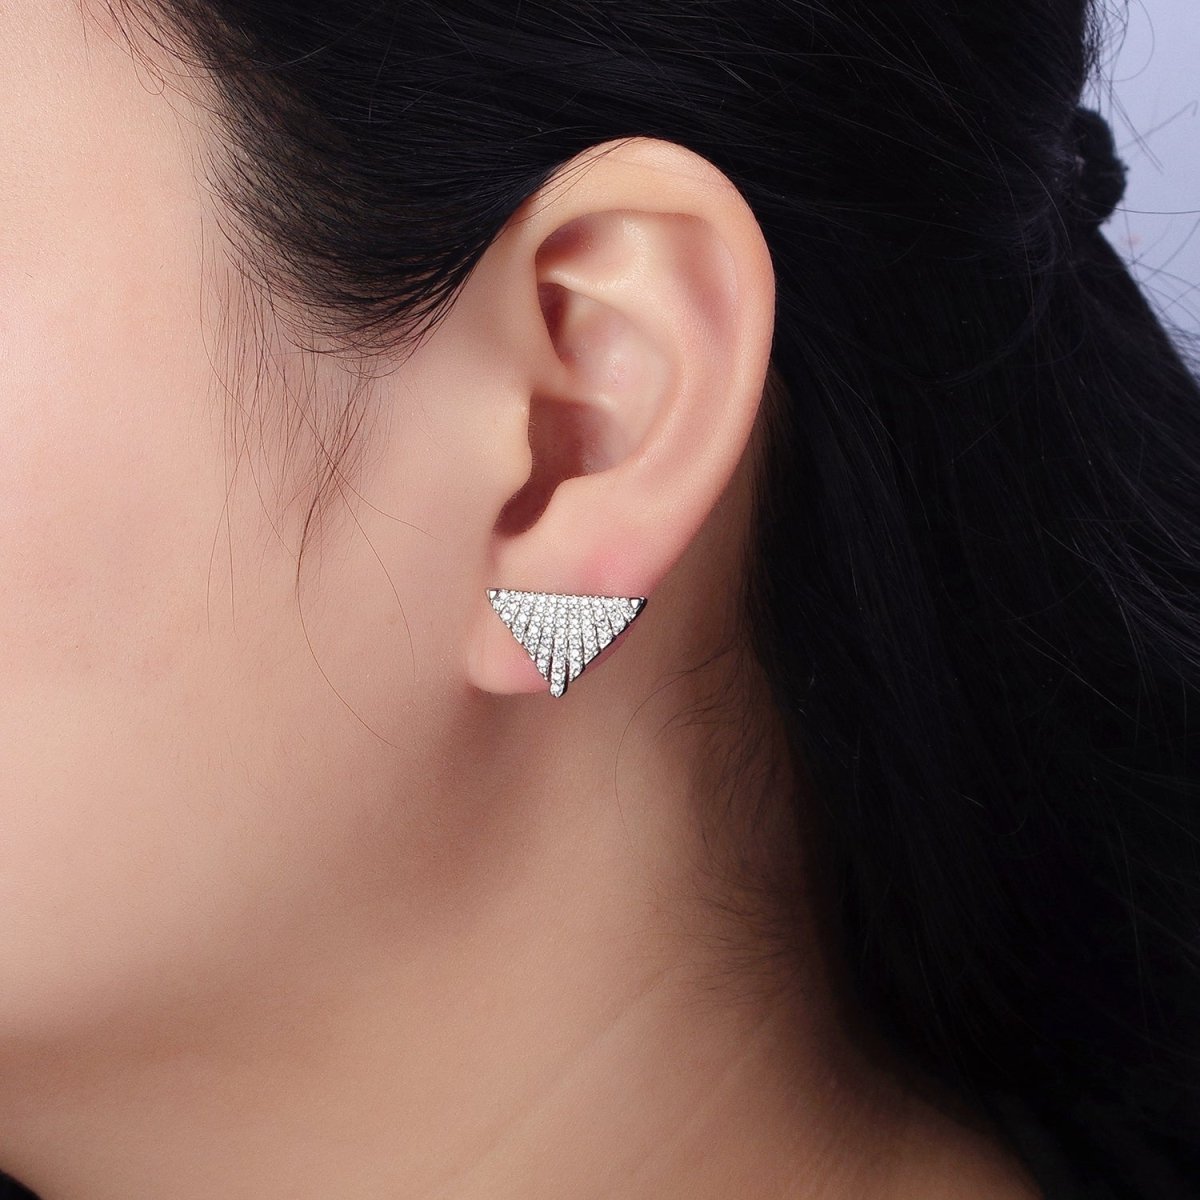 Silver, Gold Micro Paved Triangle Geometric Stud Earrings | AB403 AB777 - DLUXCA